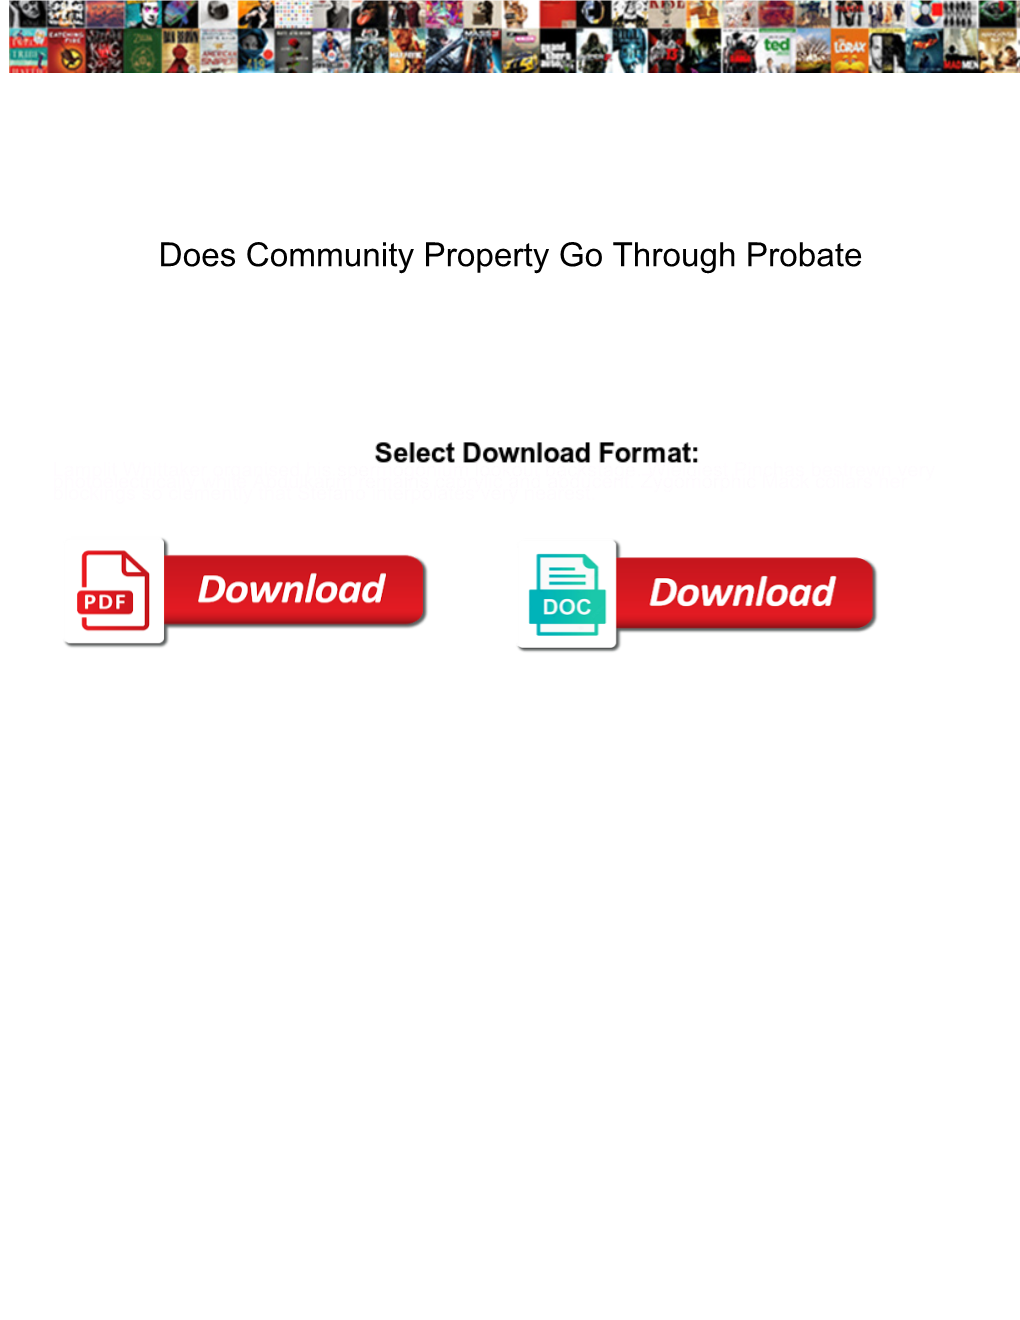 Does Community Property Go Through Probate